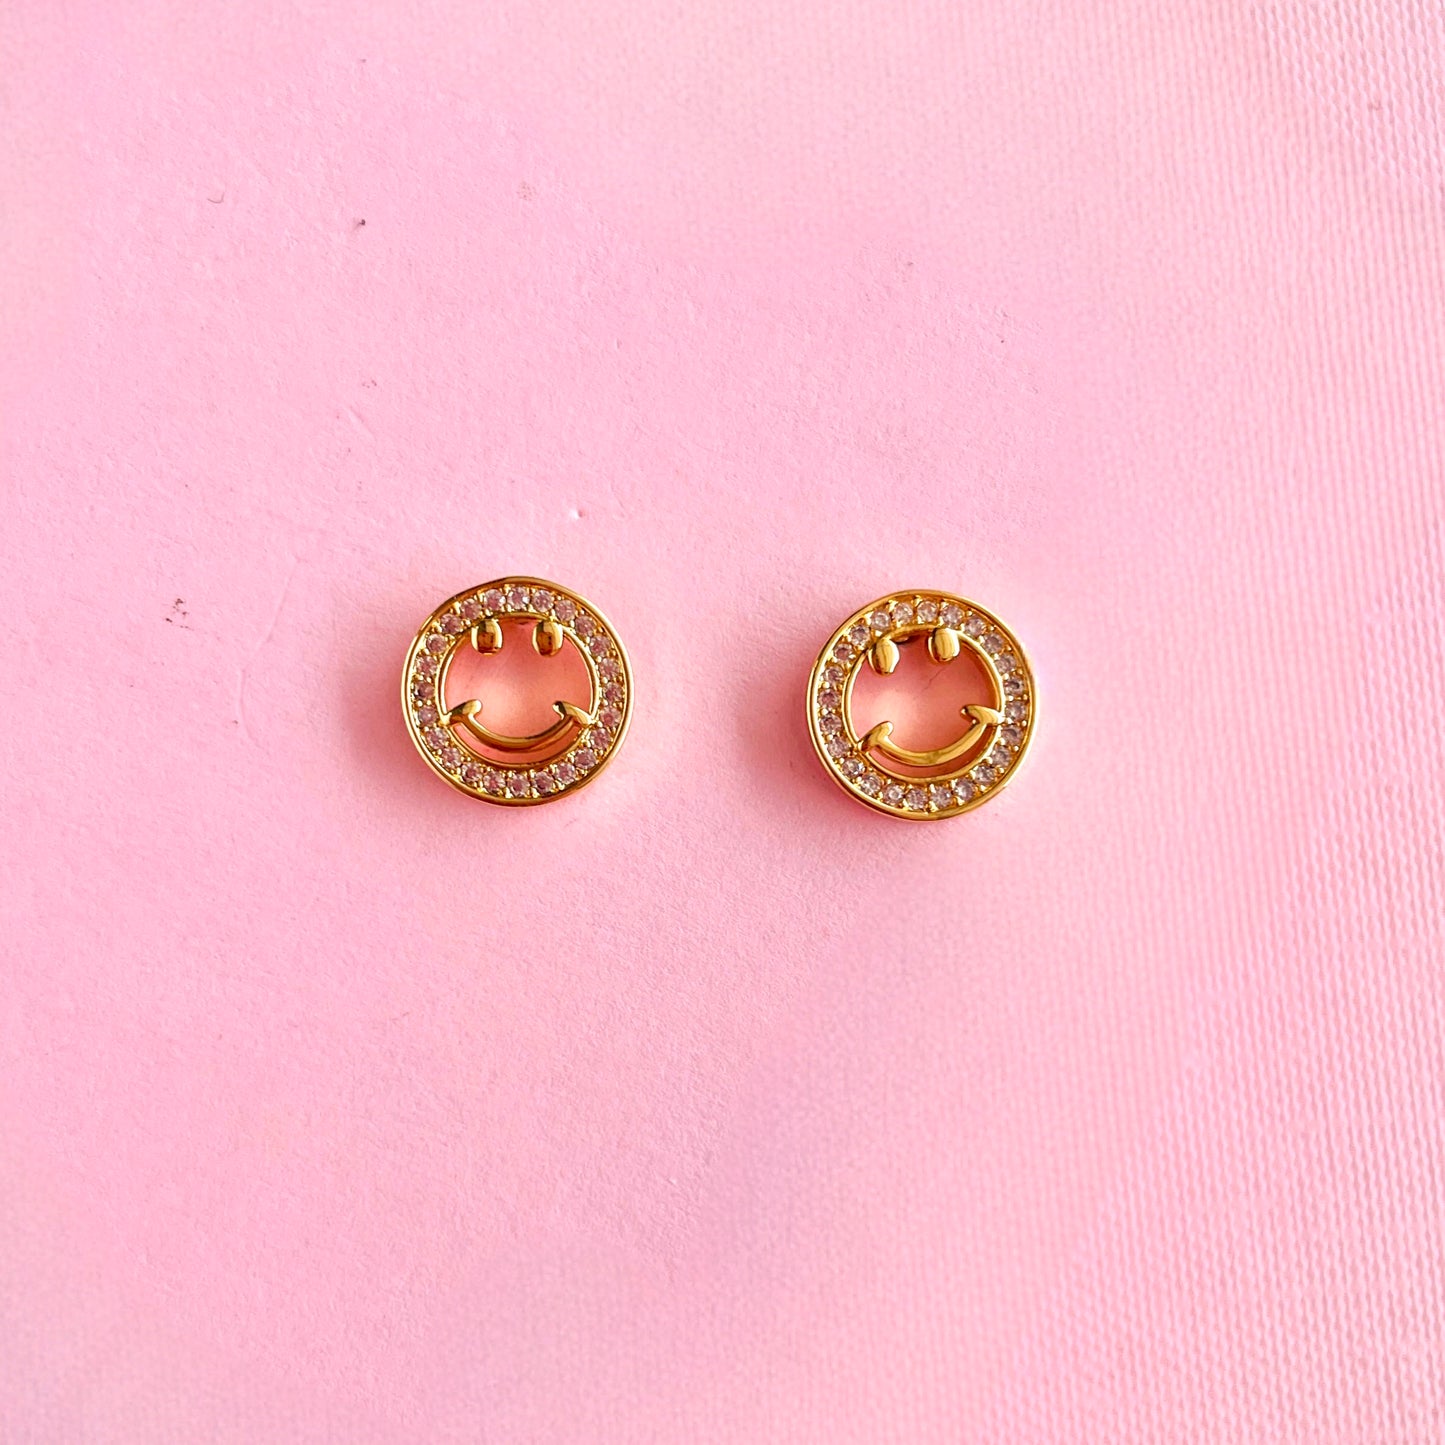 Gold and sparkly  Smiley Face Studs Earrings